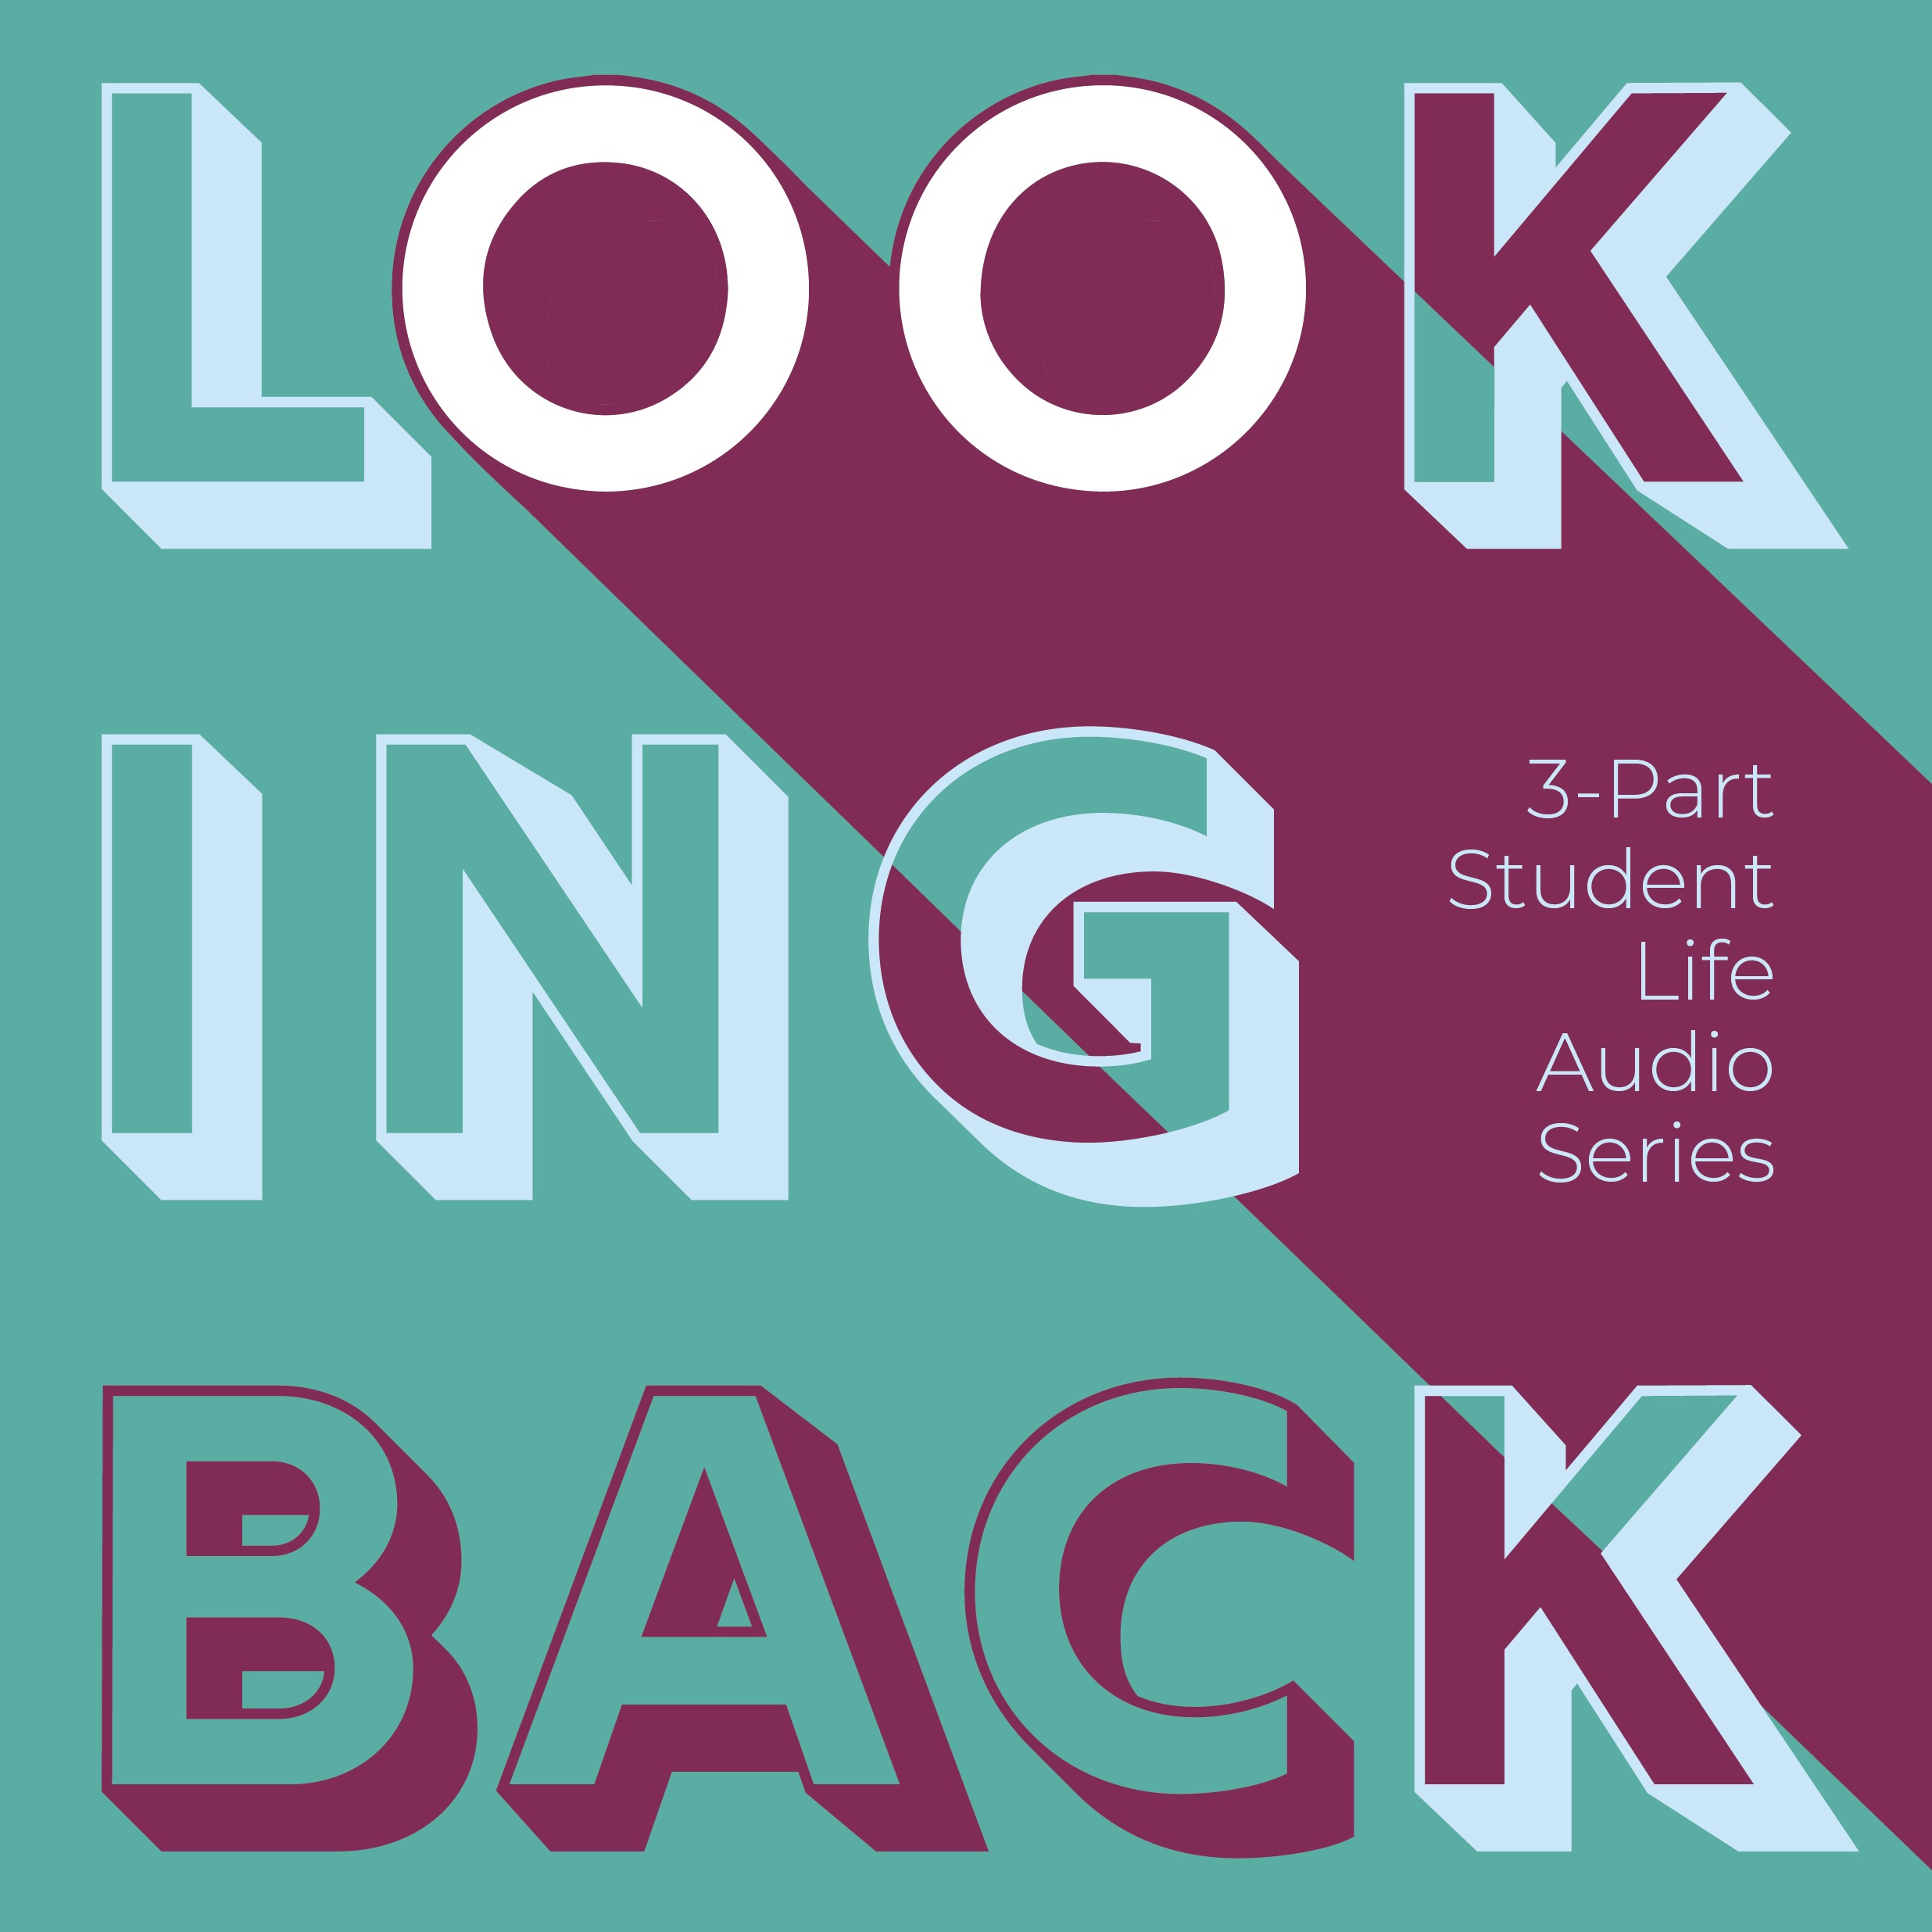 The words "Looking Back" spread across three horizontal lines in green and purple colors. On the right side, smaller purple text reads "3-Part Student Life Audio Series." A purple trapezoid from the right side of the screen makes the two Os in the word "Look" appear like eyes."